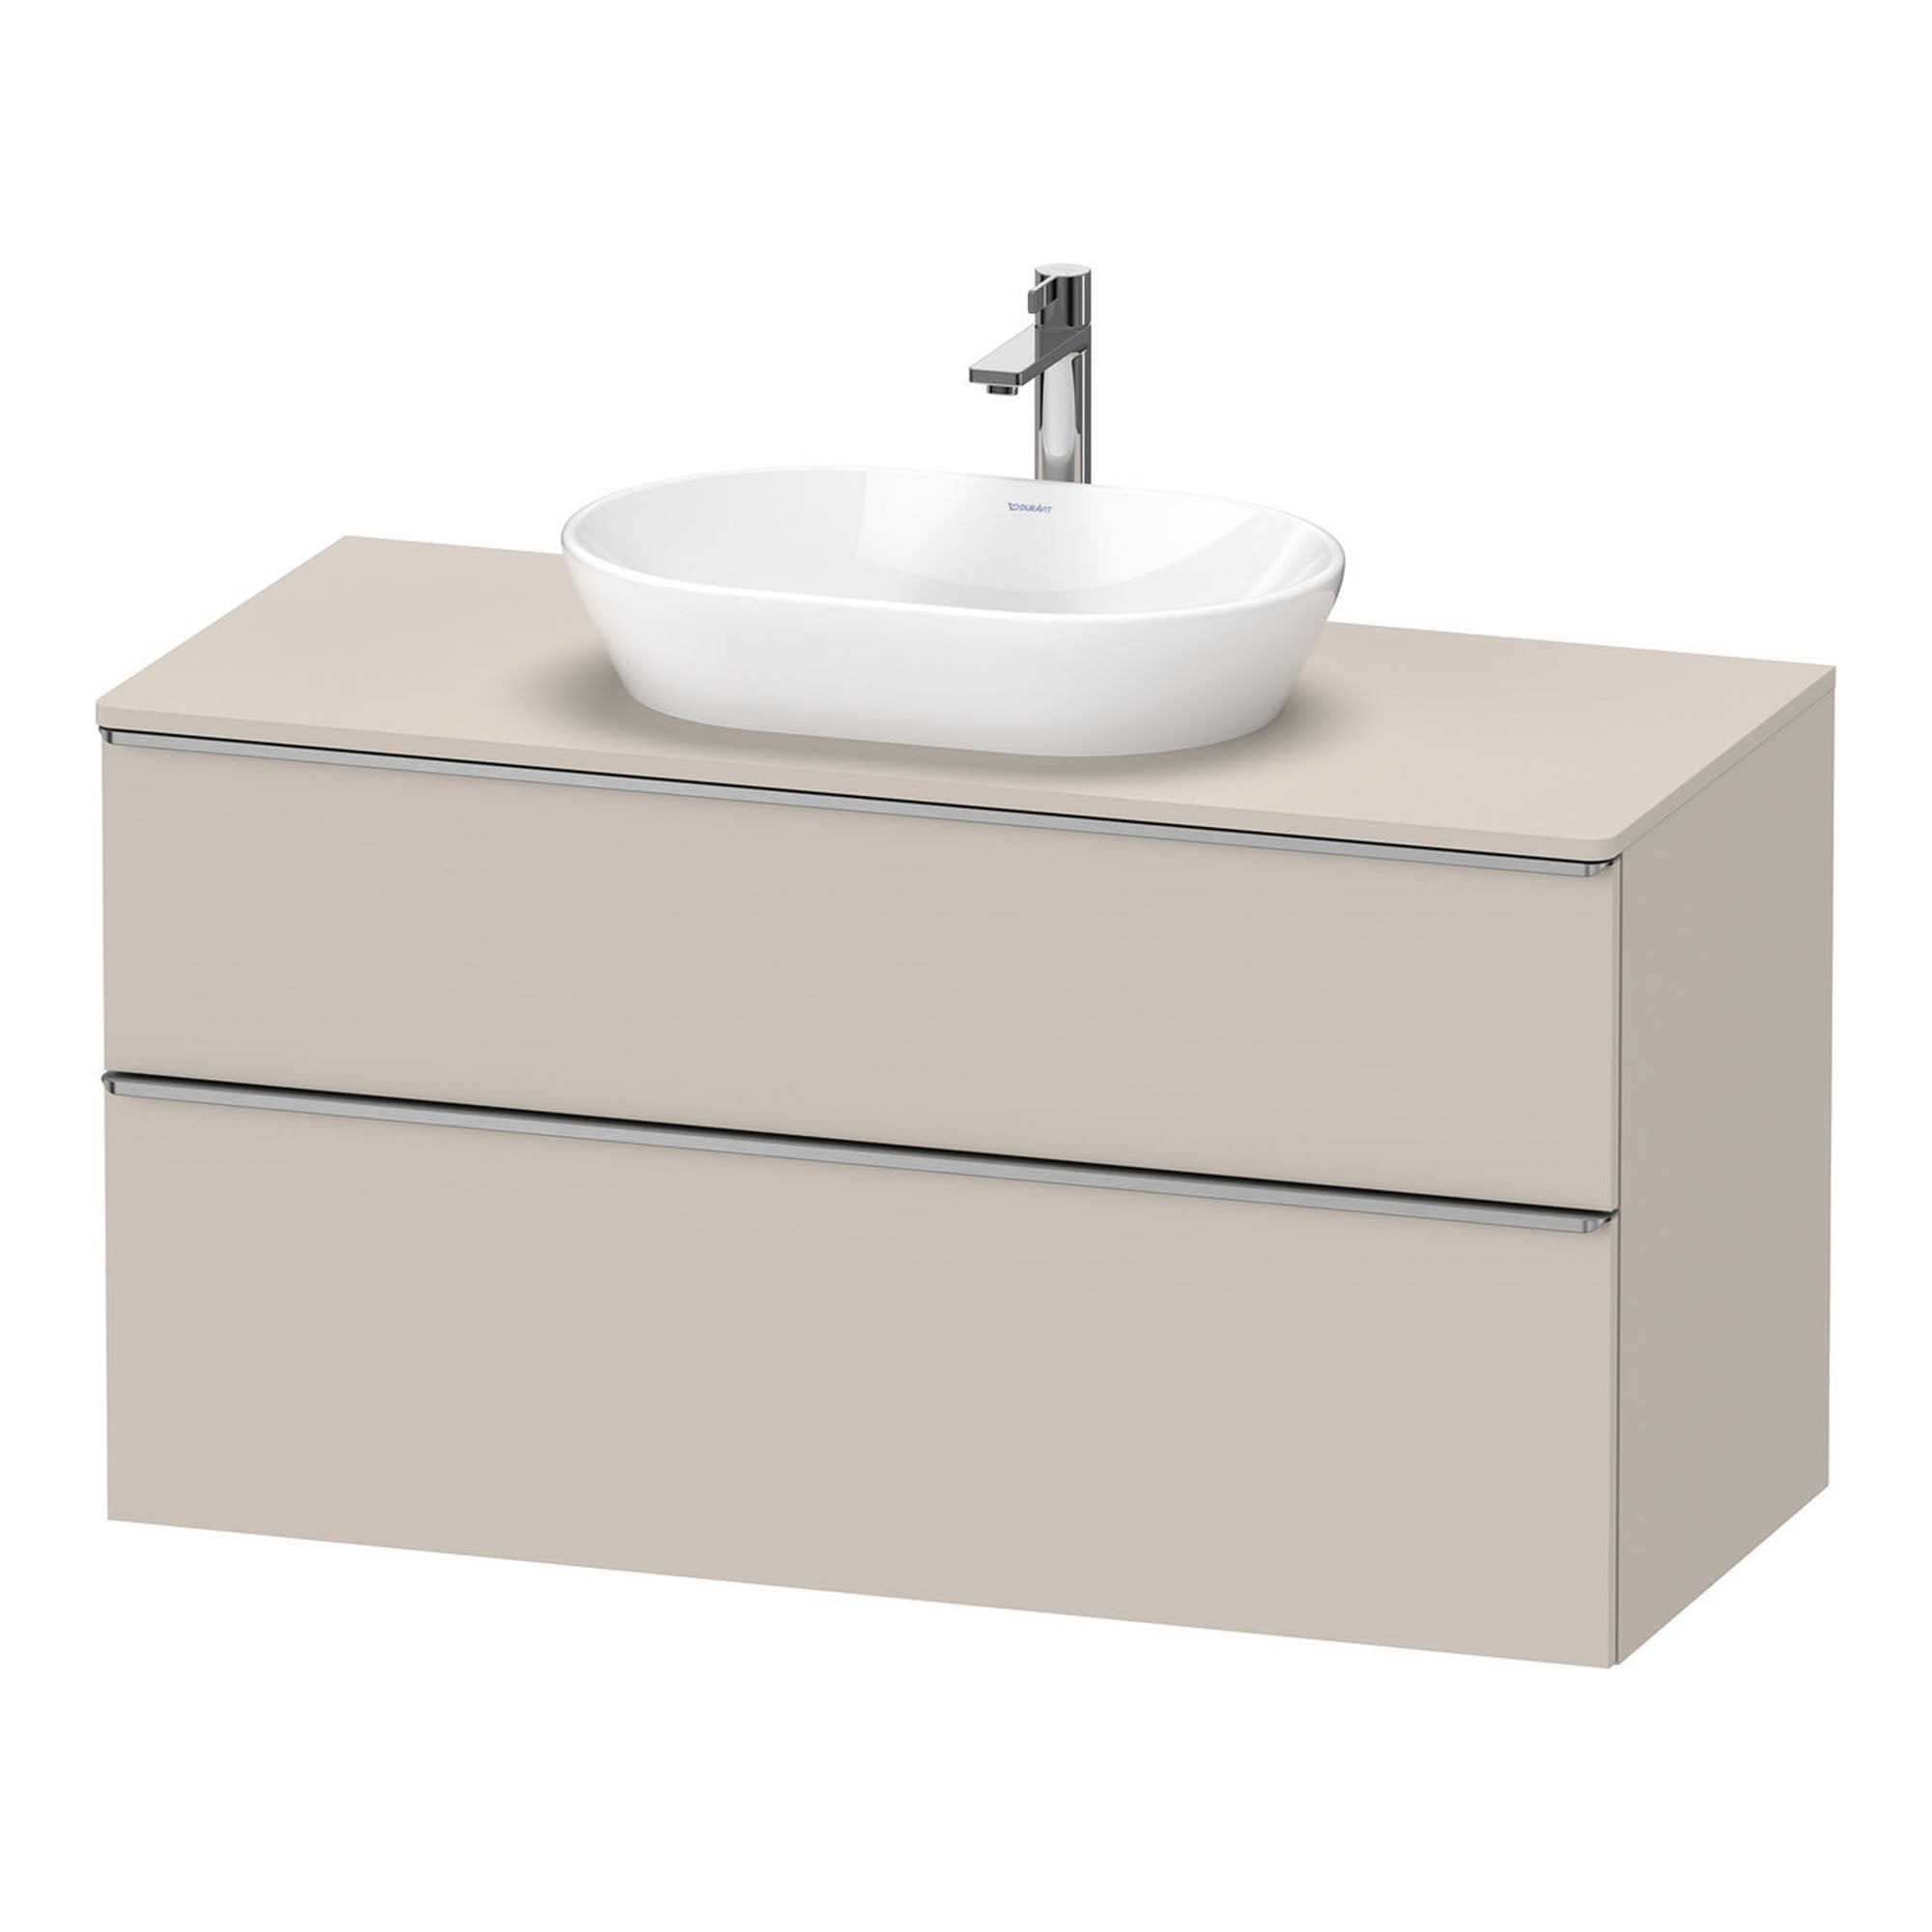 duravit d-neo 1200 wall mounted vanity unit with worktop taupe stainless steel handles